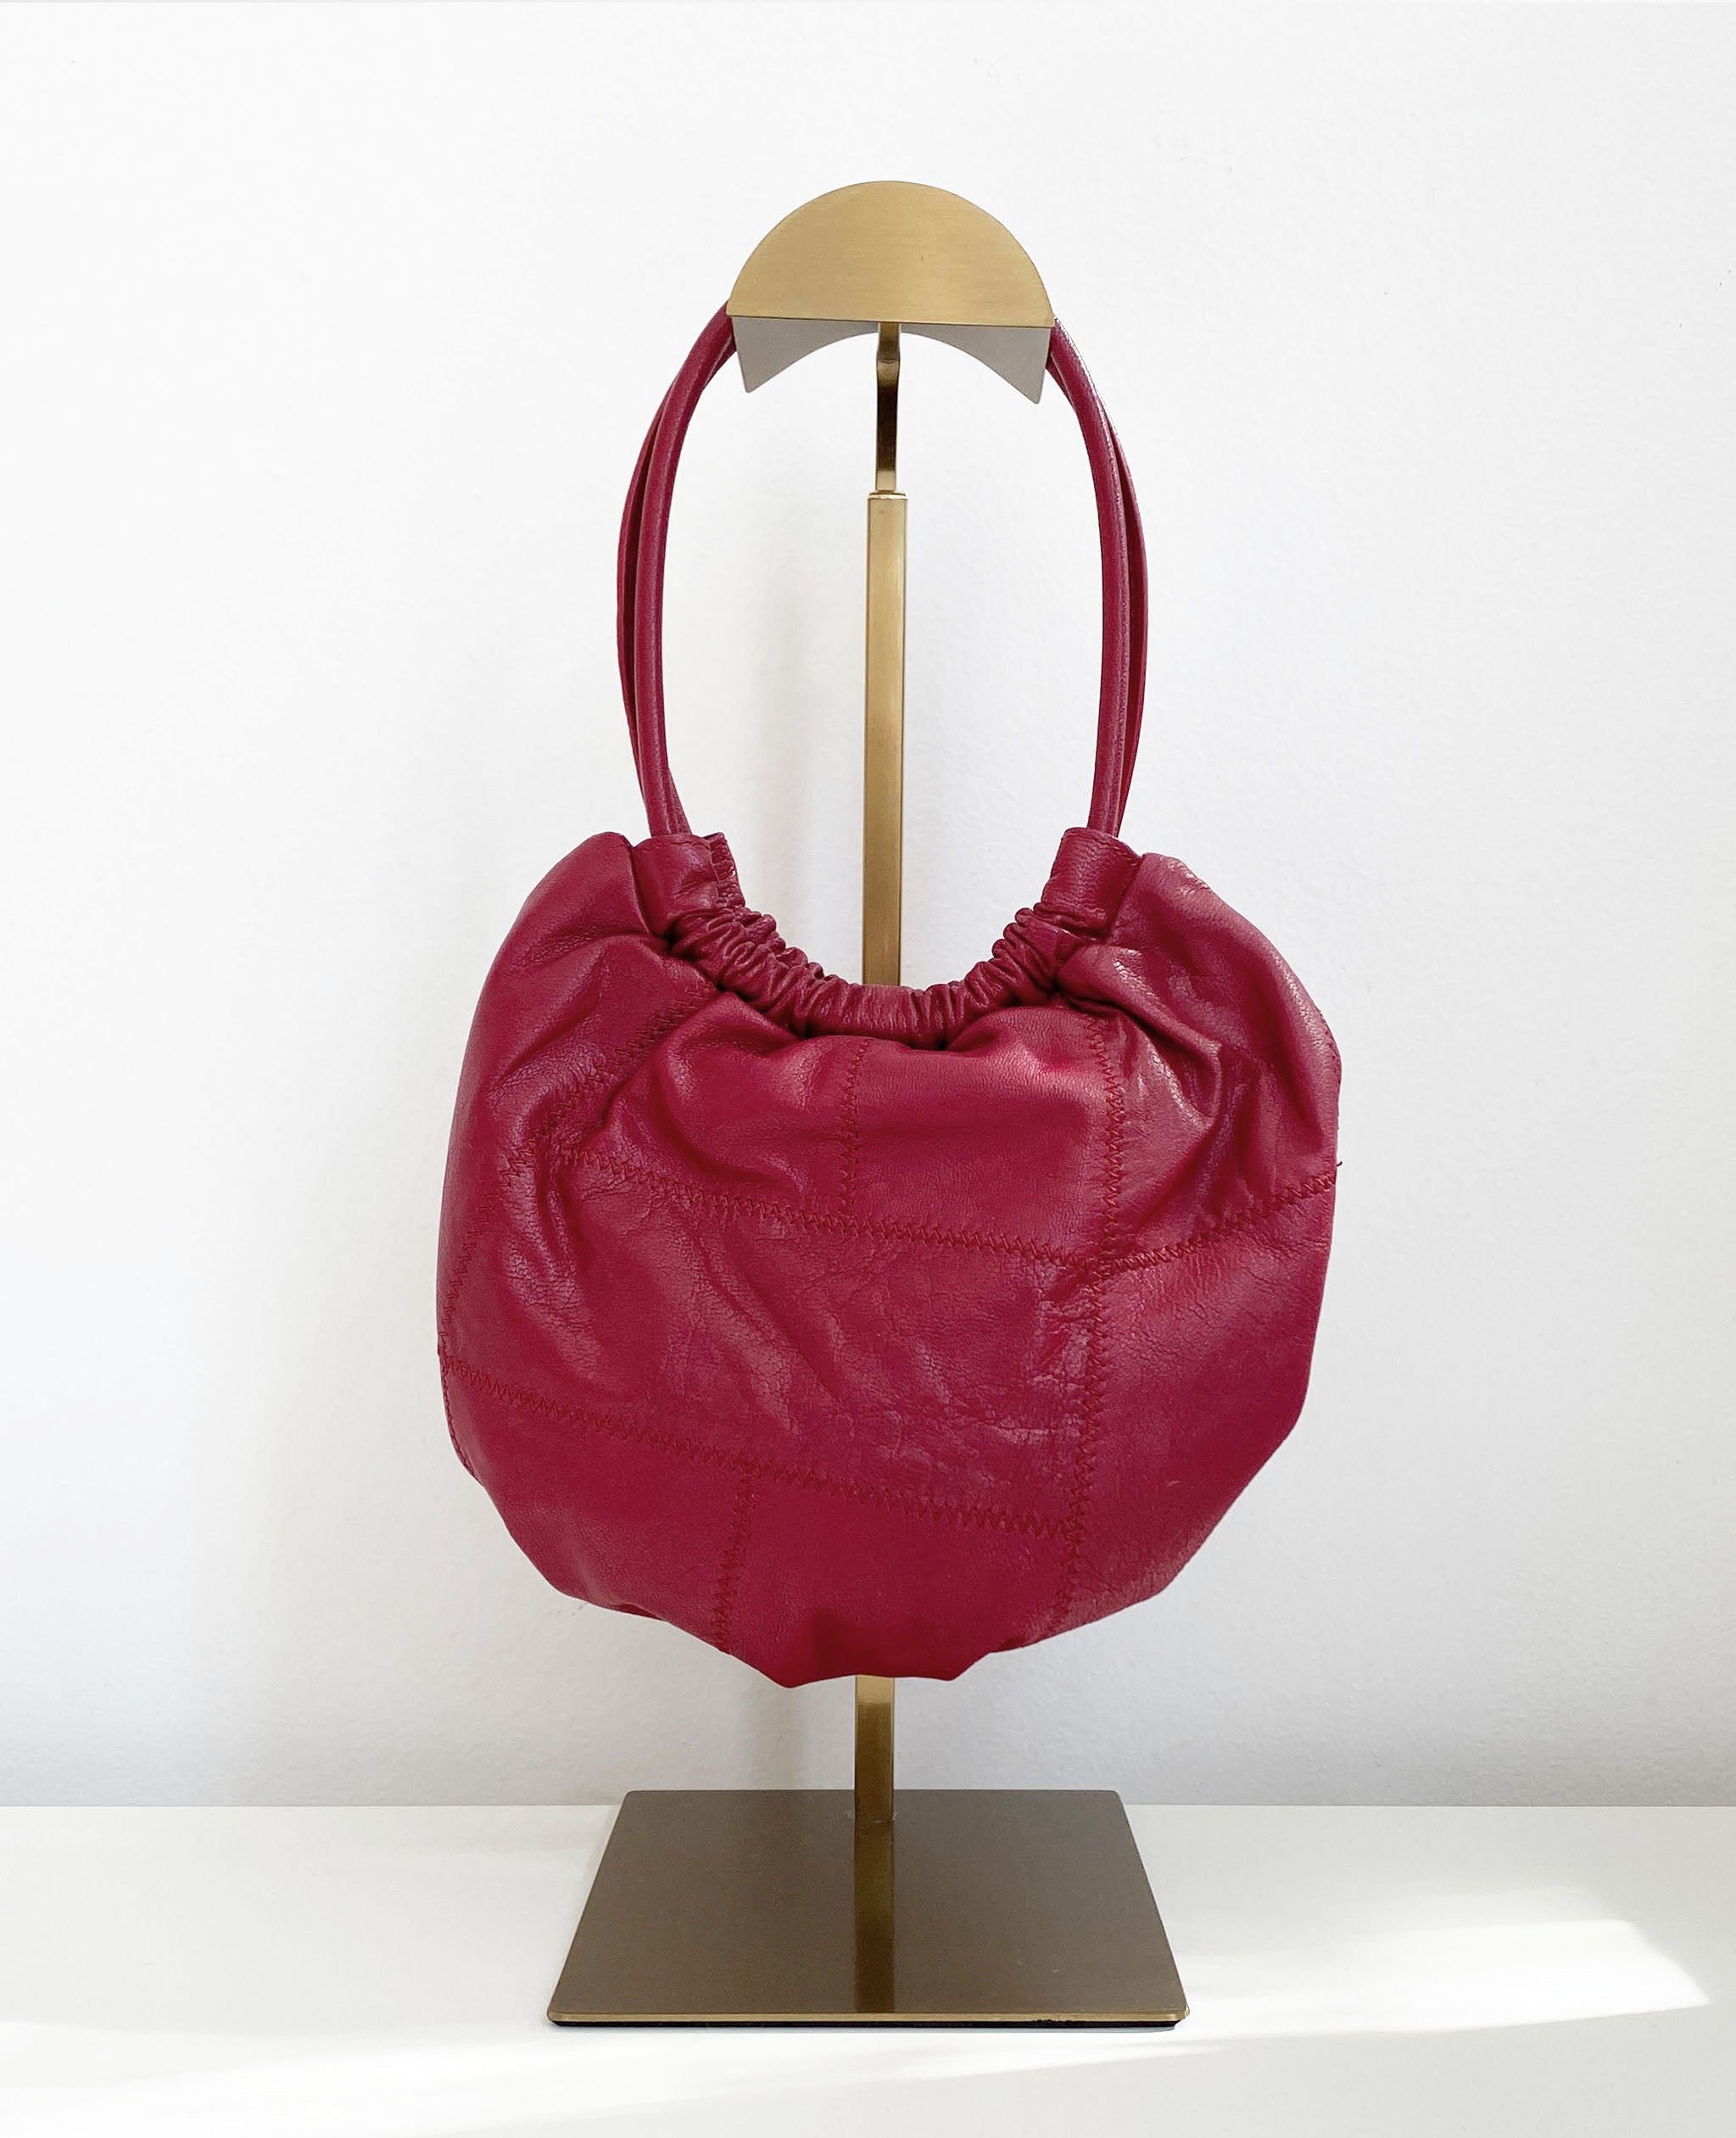 Red Leather Mini Bag